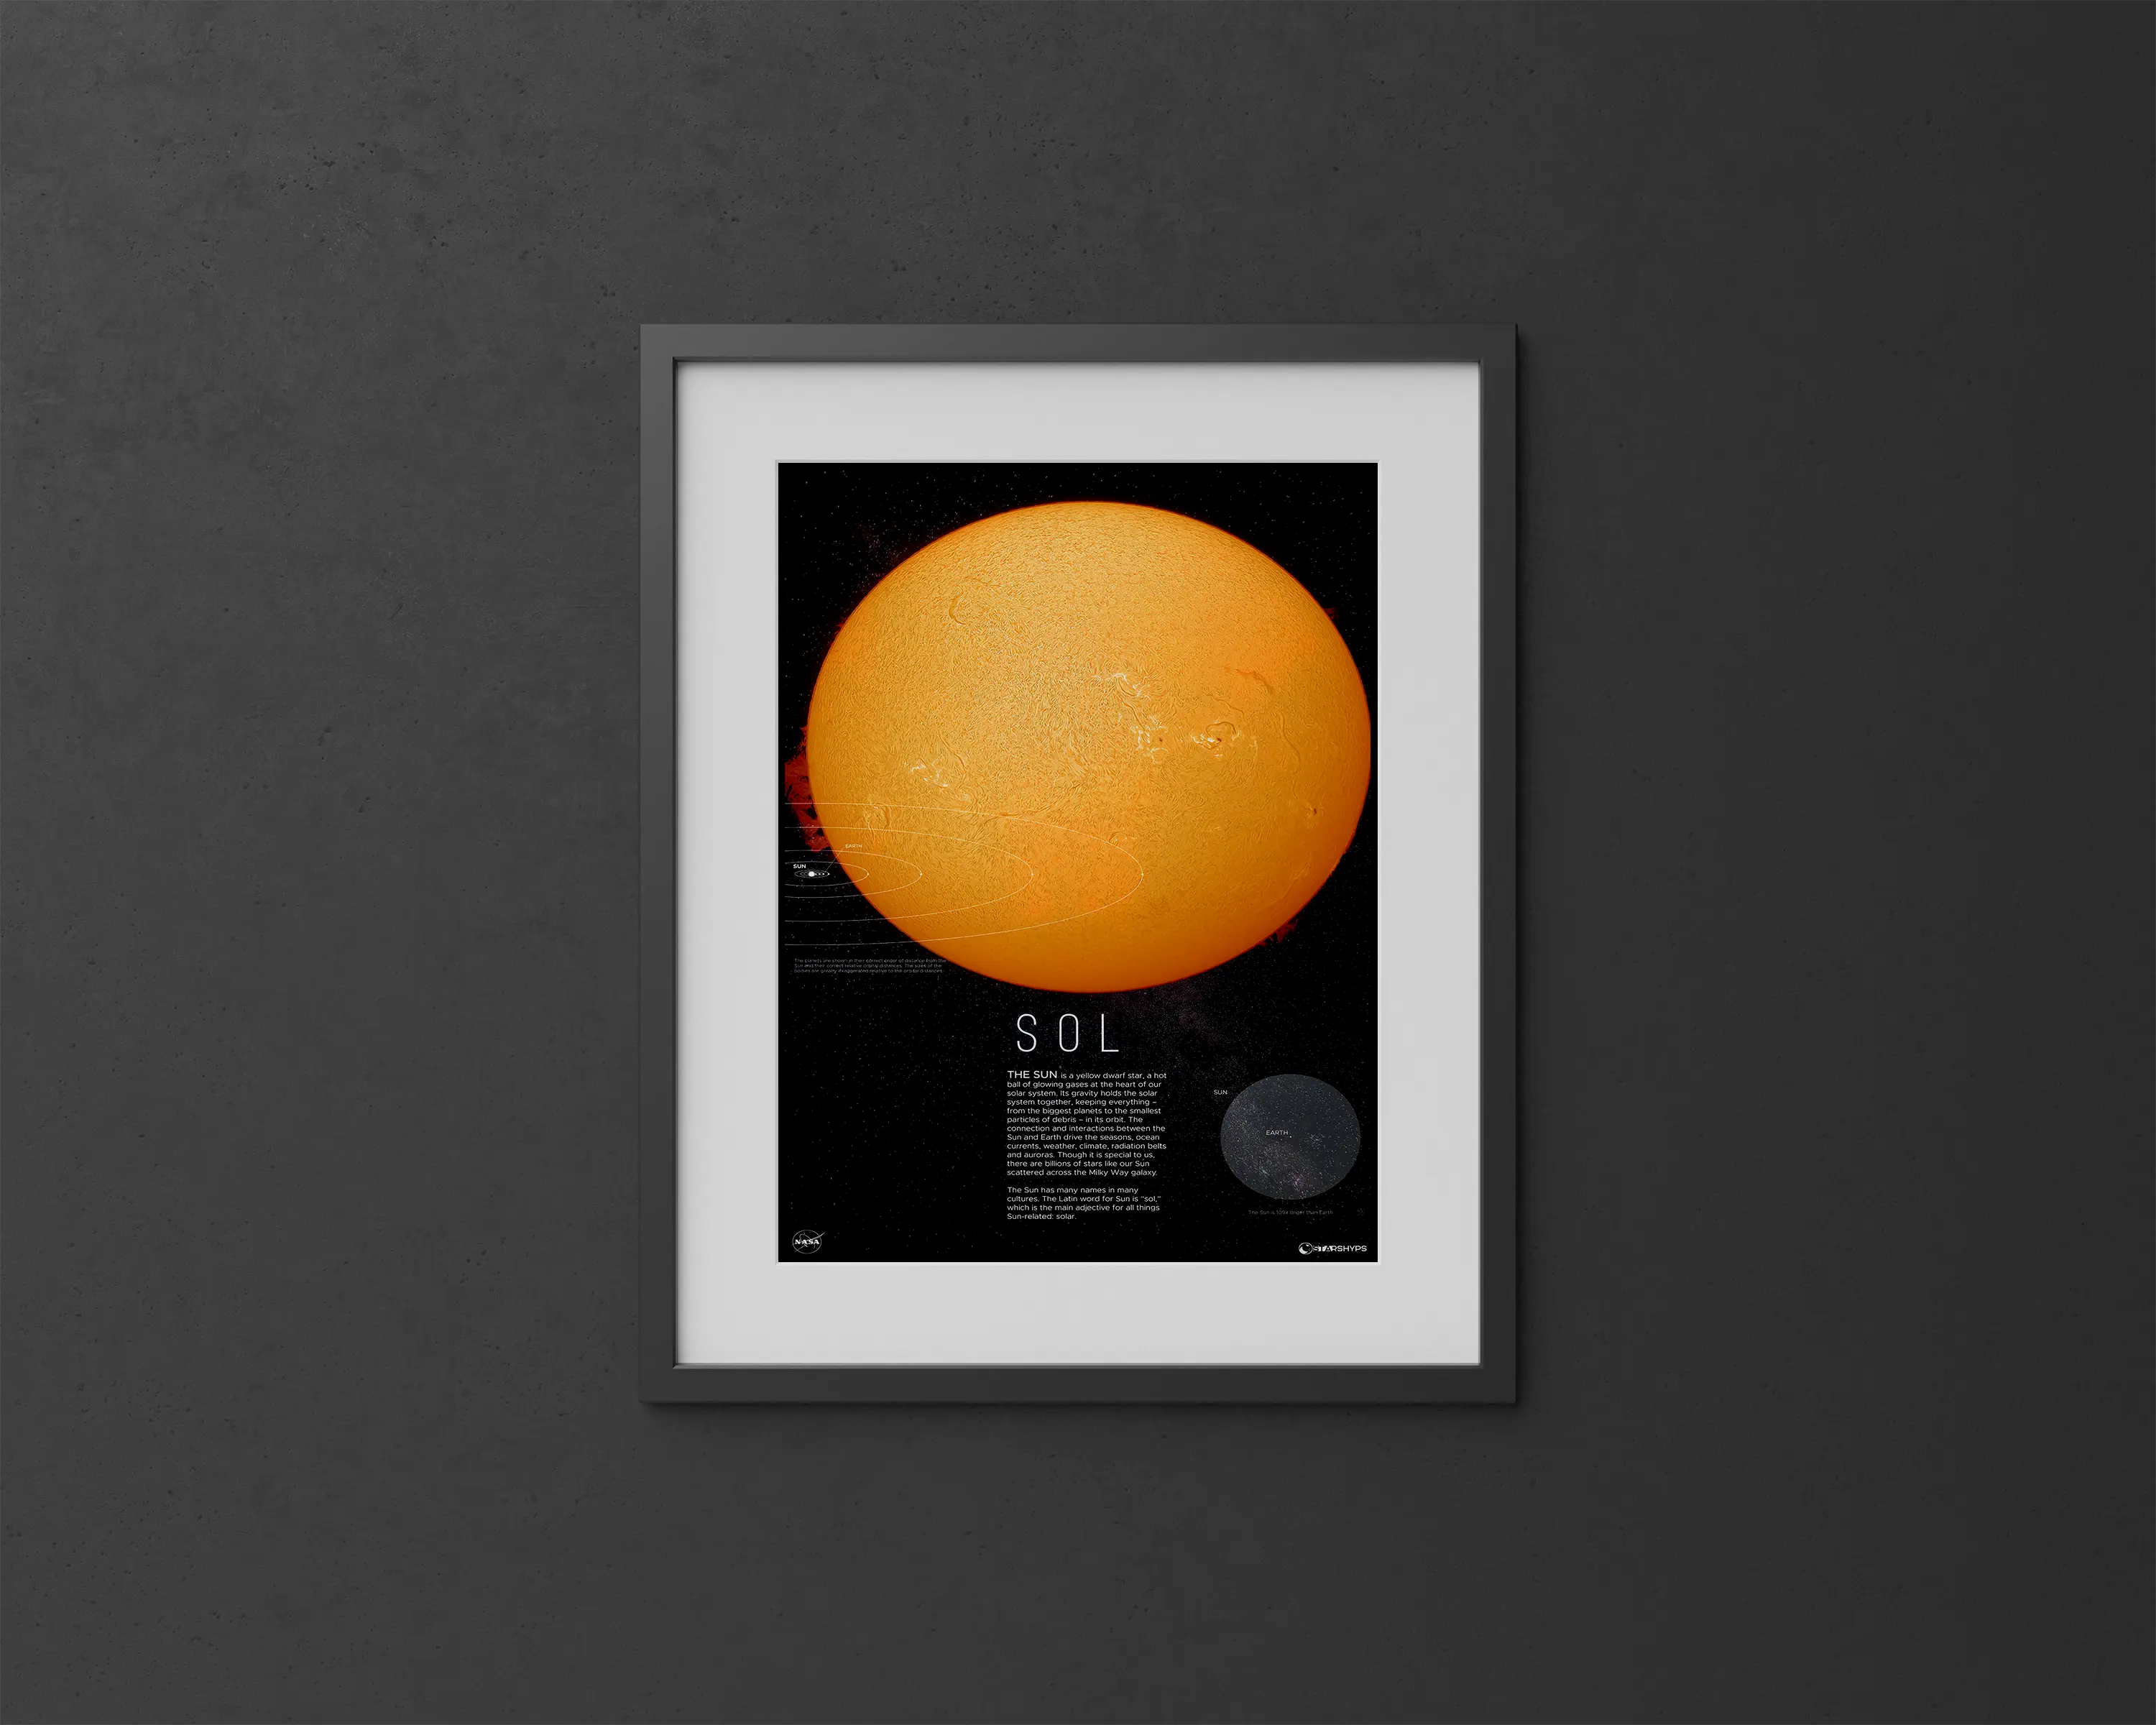 Solar Radiance Decor | Sun Center Print | Rocket Blueprint Posters | This image features a framed poster of the Sun, titled "SOL," set against a dark gray background. The poster includes a detailed yellow-orange Sun, text providing information about the Sun, and a size comparison with Earth at the bottom right.